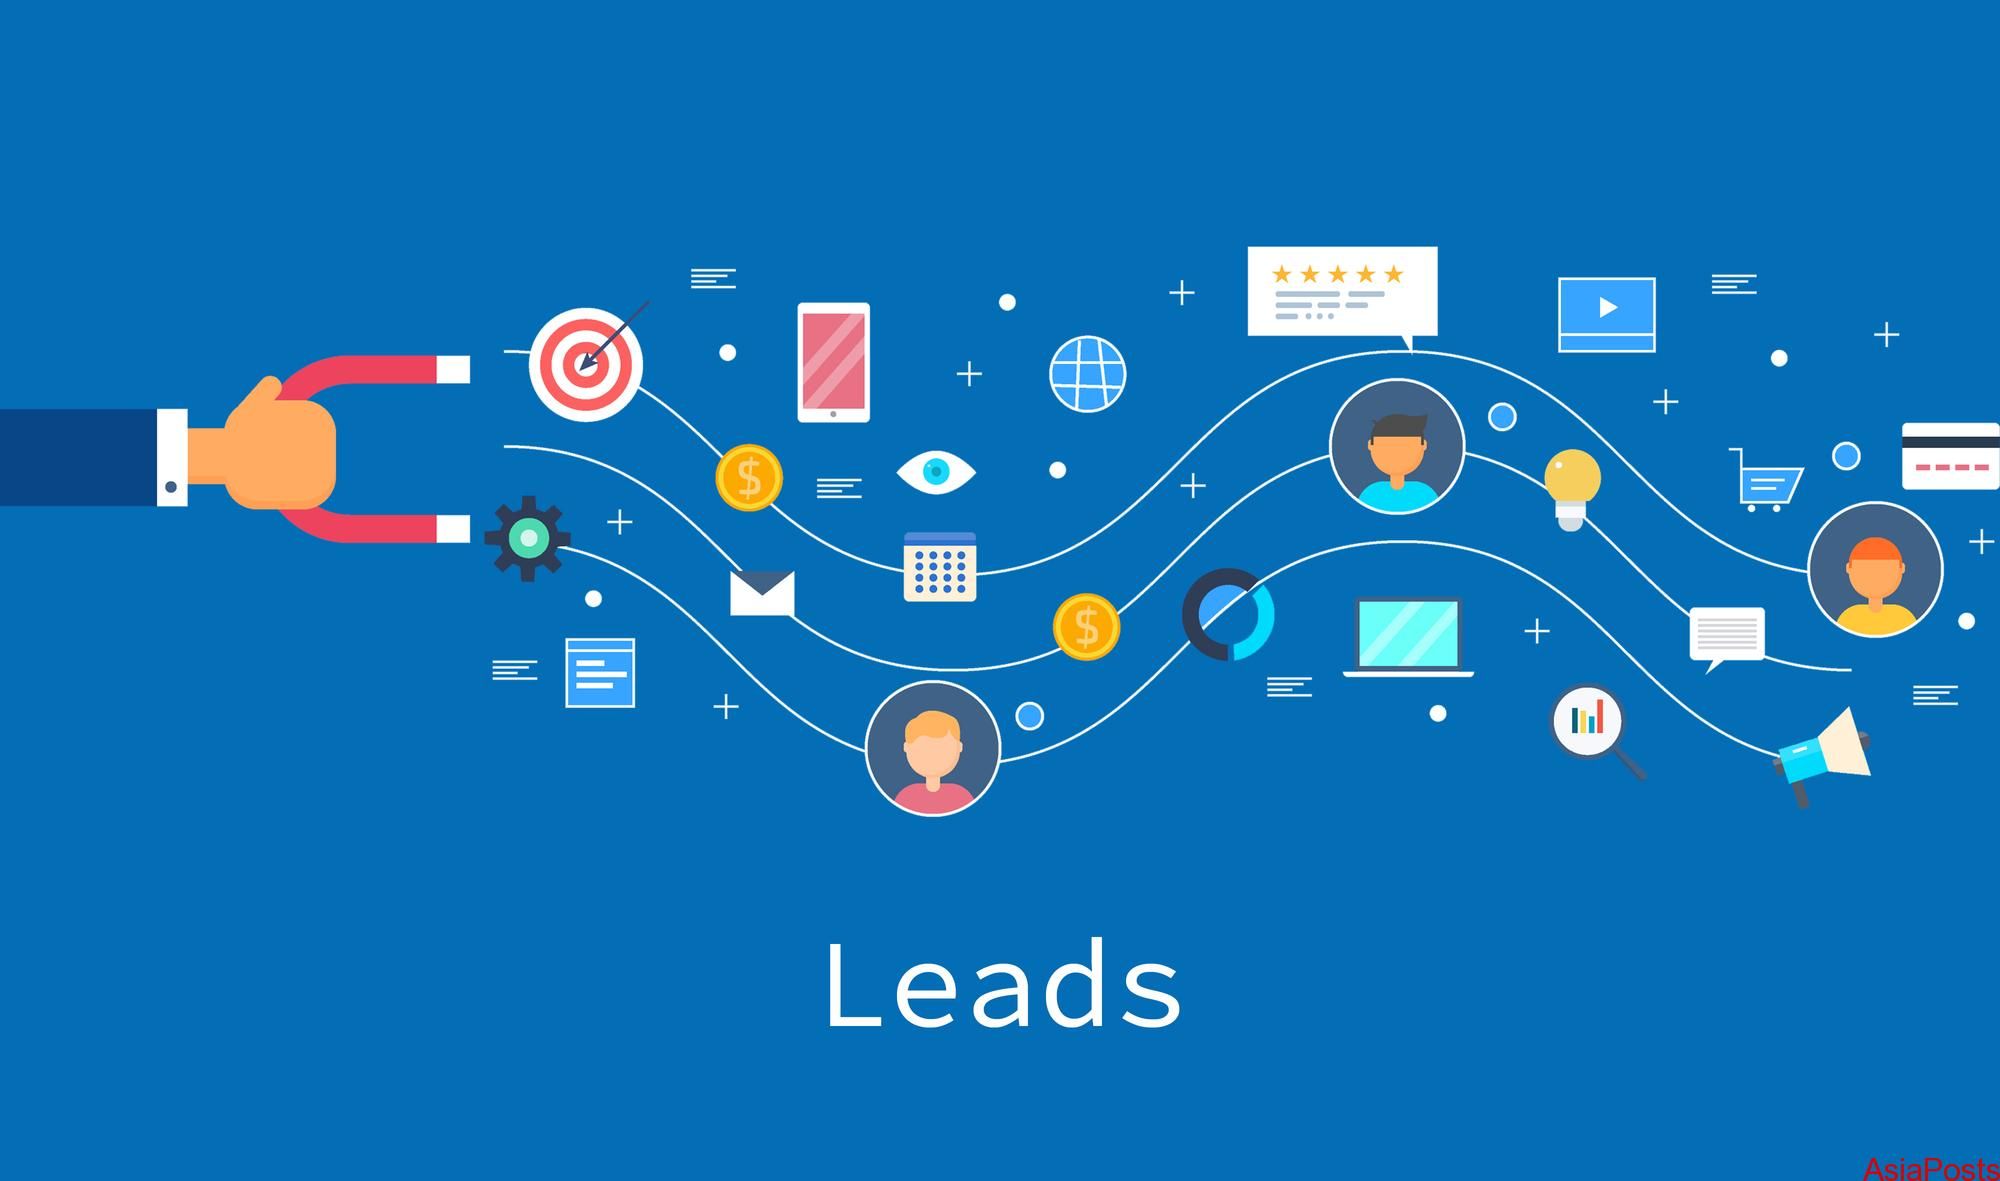 Lead Manager: Convert every single lead